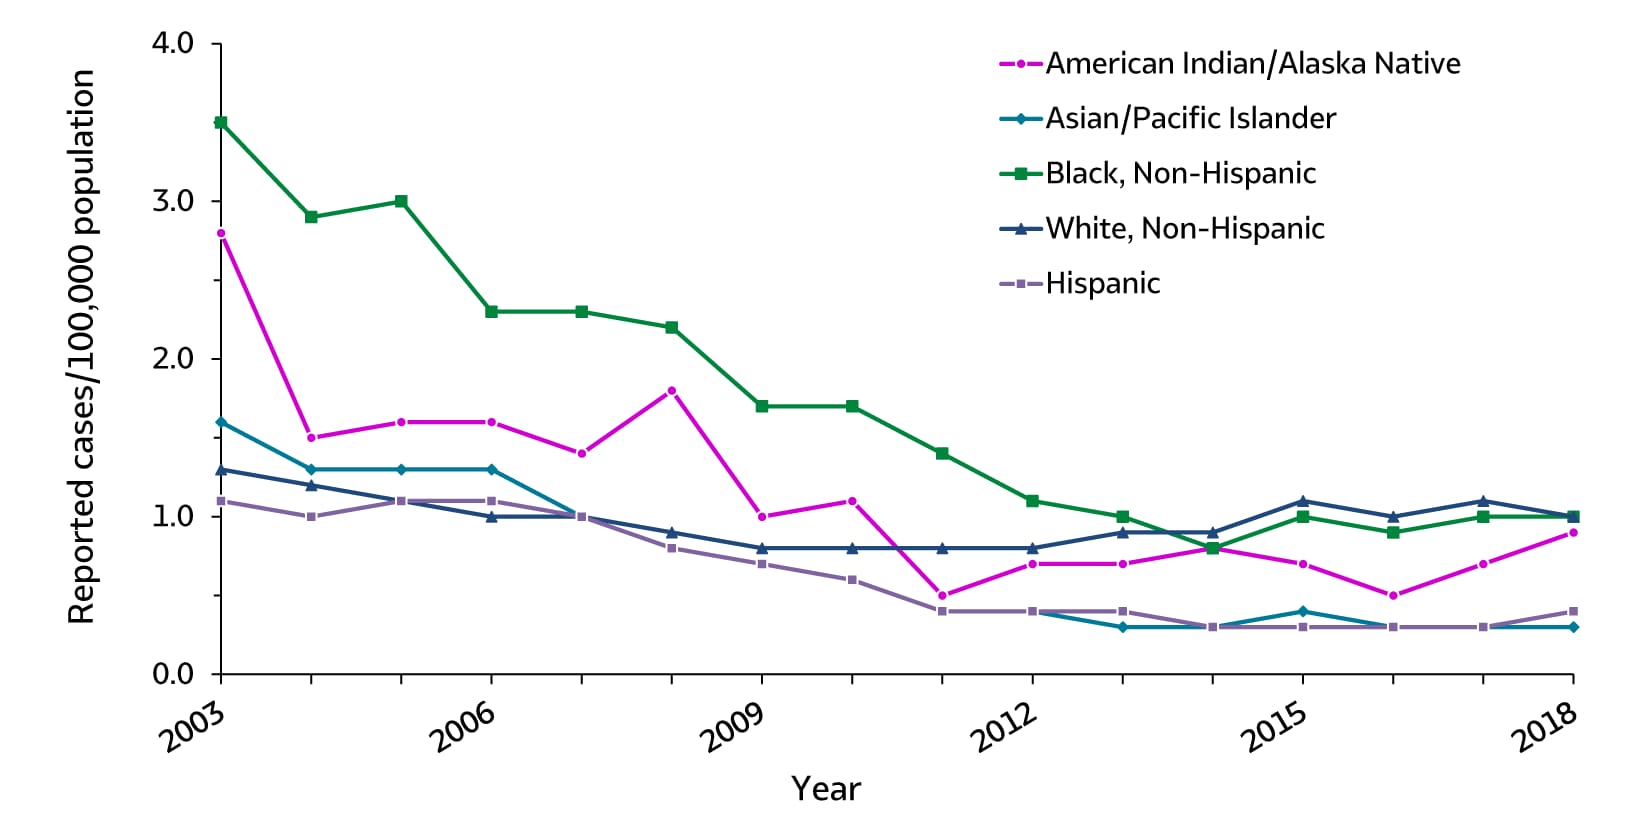 Figure 2.6. The line graph shows trends in rates of acute hepatitis B by race/ethnicity from 2003 – 2018. The race/ethnicity classifications are American Indian/Alaska Native, Asian/Pacific Islander, Black non-Hispanic, White non-Hispanic, and Hispanic. From 2003 through 2015 there was a decline in acute hepatitis B across all races/ethnicities. There was a small increase in acute hepatitis B from 2016 – 2018 for American Indian/Alaska Natives.